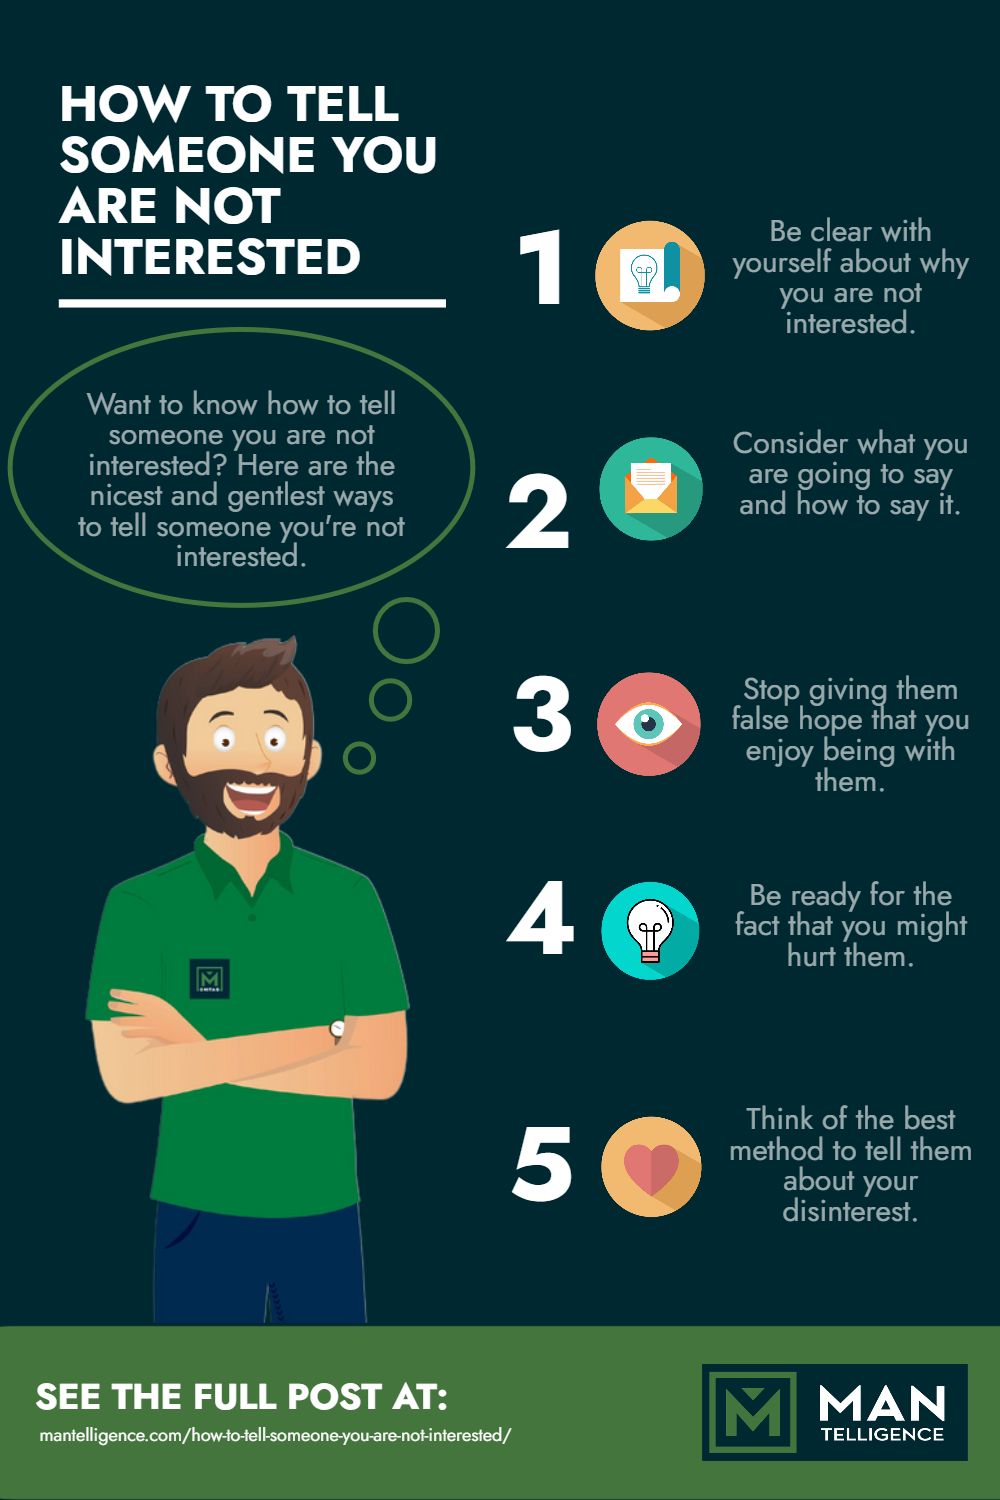 How to tell someone you are not interested - Infographic